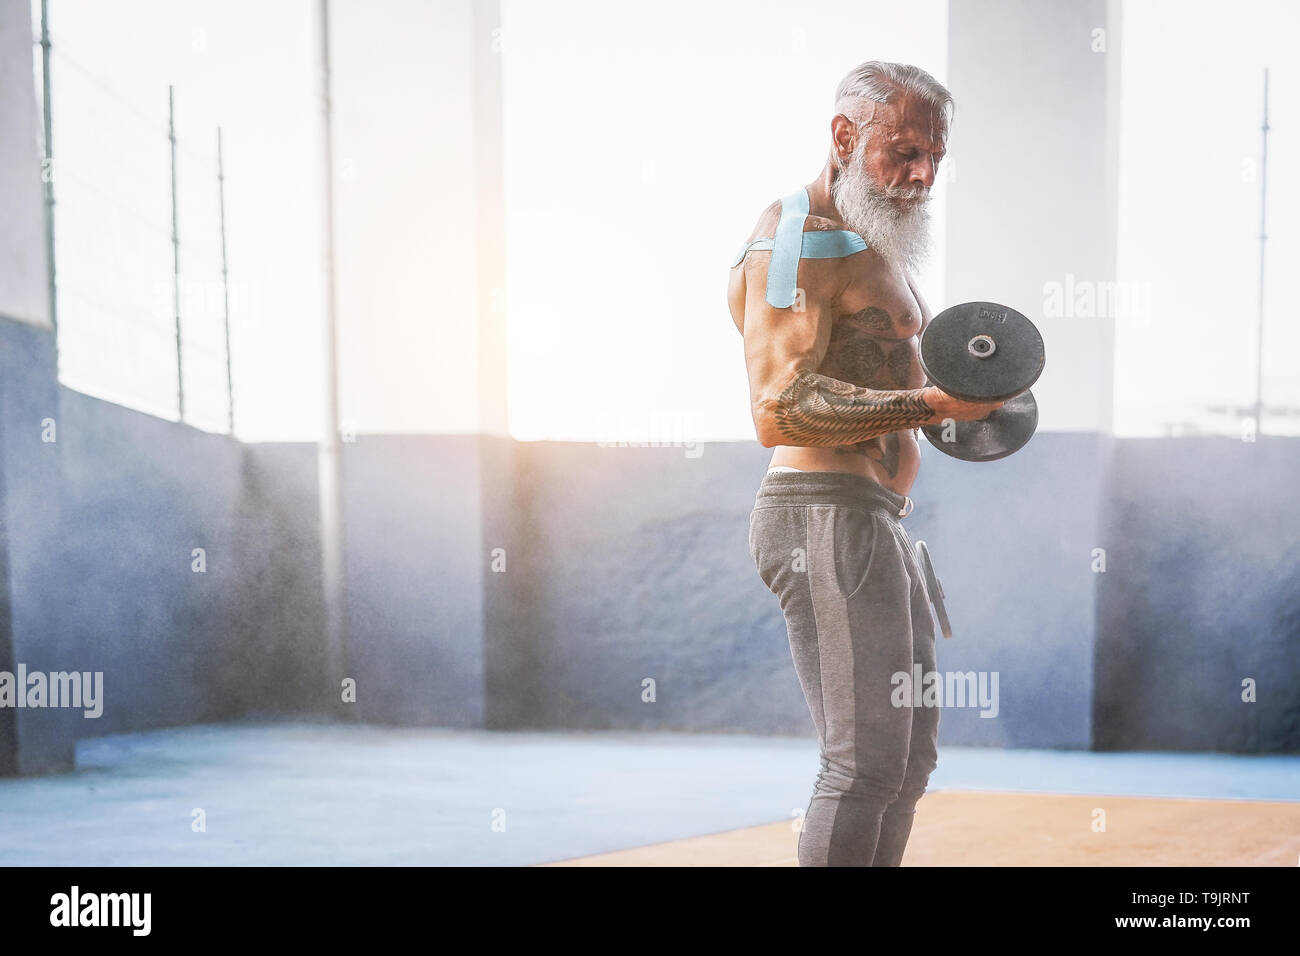 Fitness beard man doing biceps curl exercise inside a gym - Tattoo senior man training with dumbbells in wellness club center Stock Photo